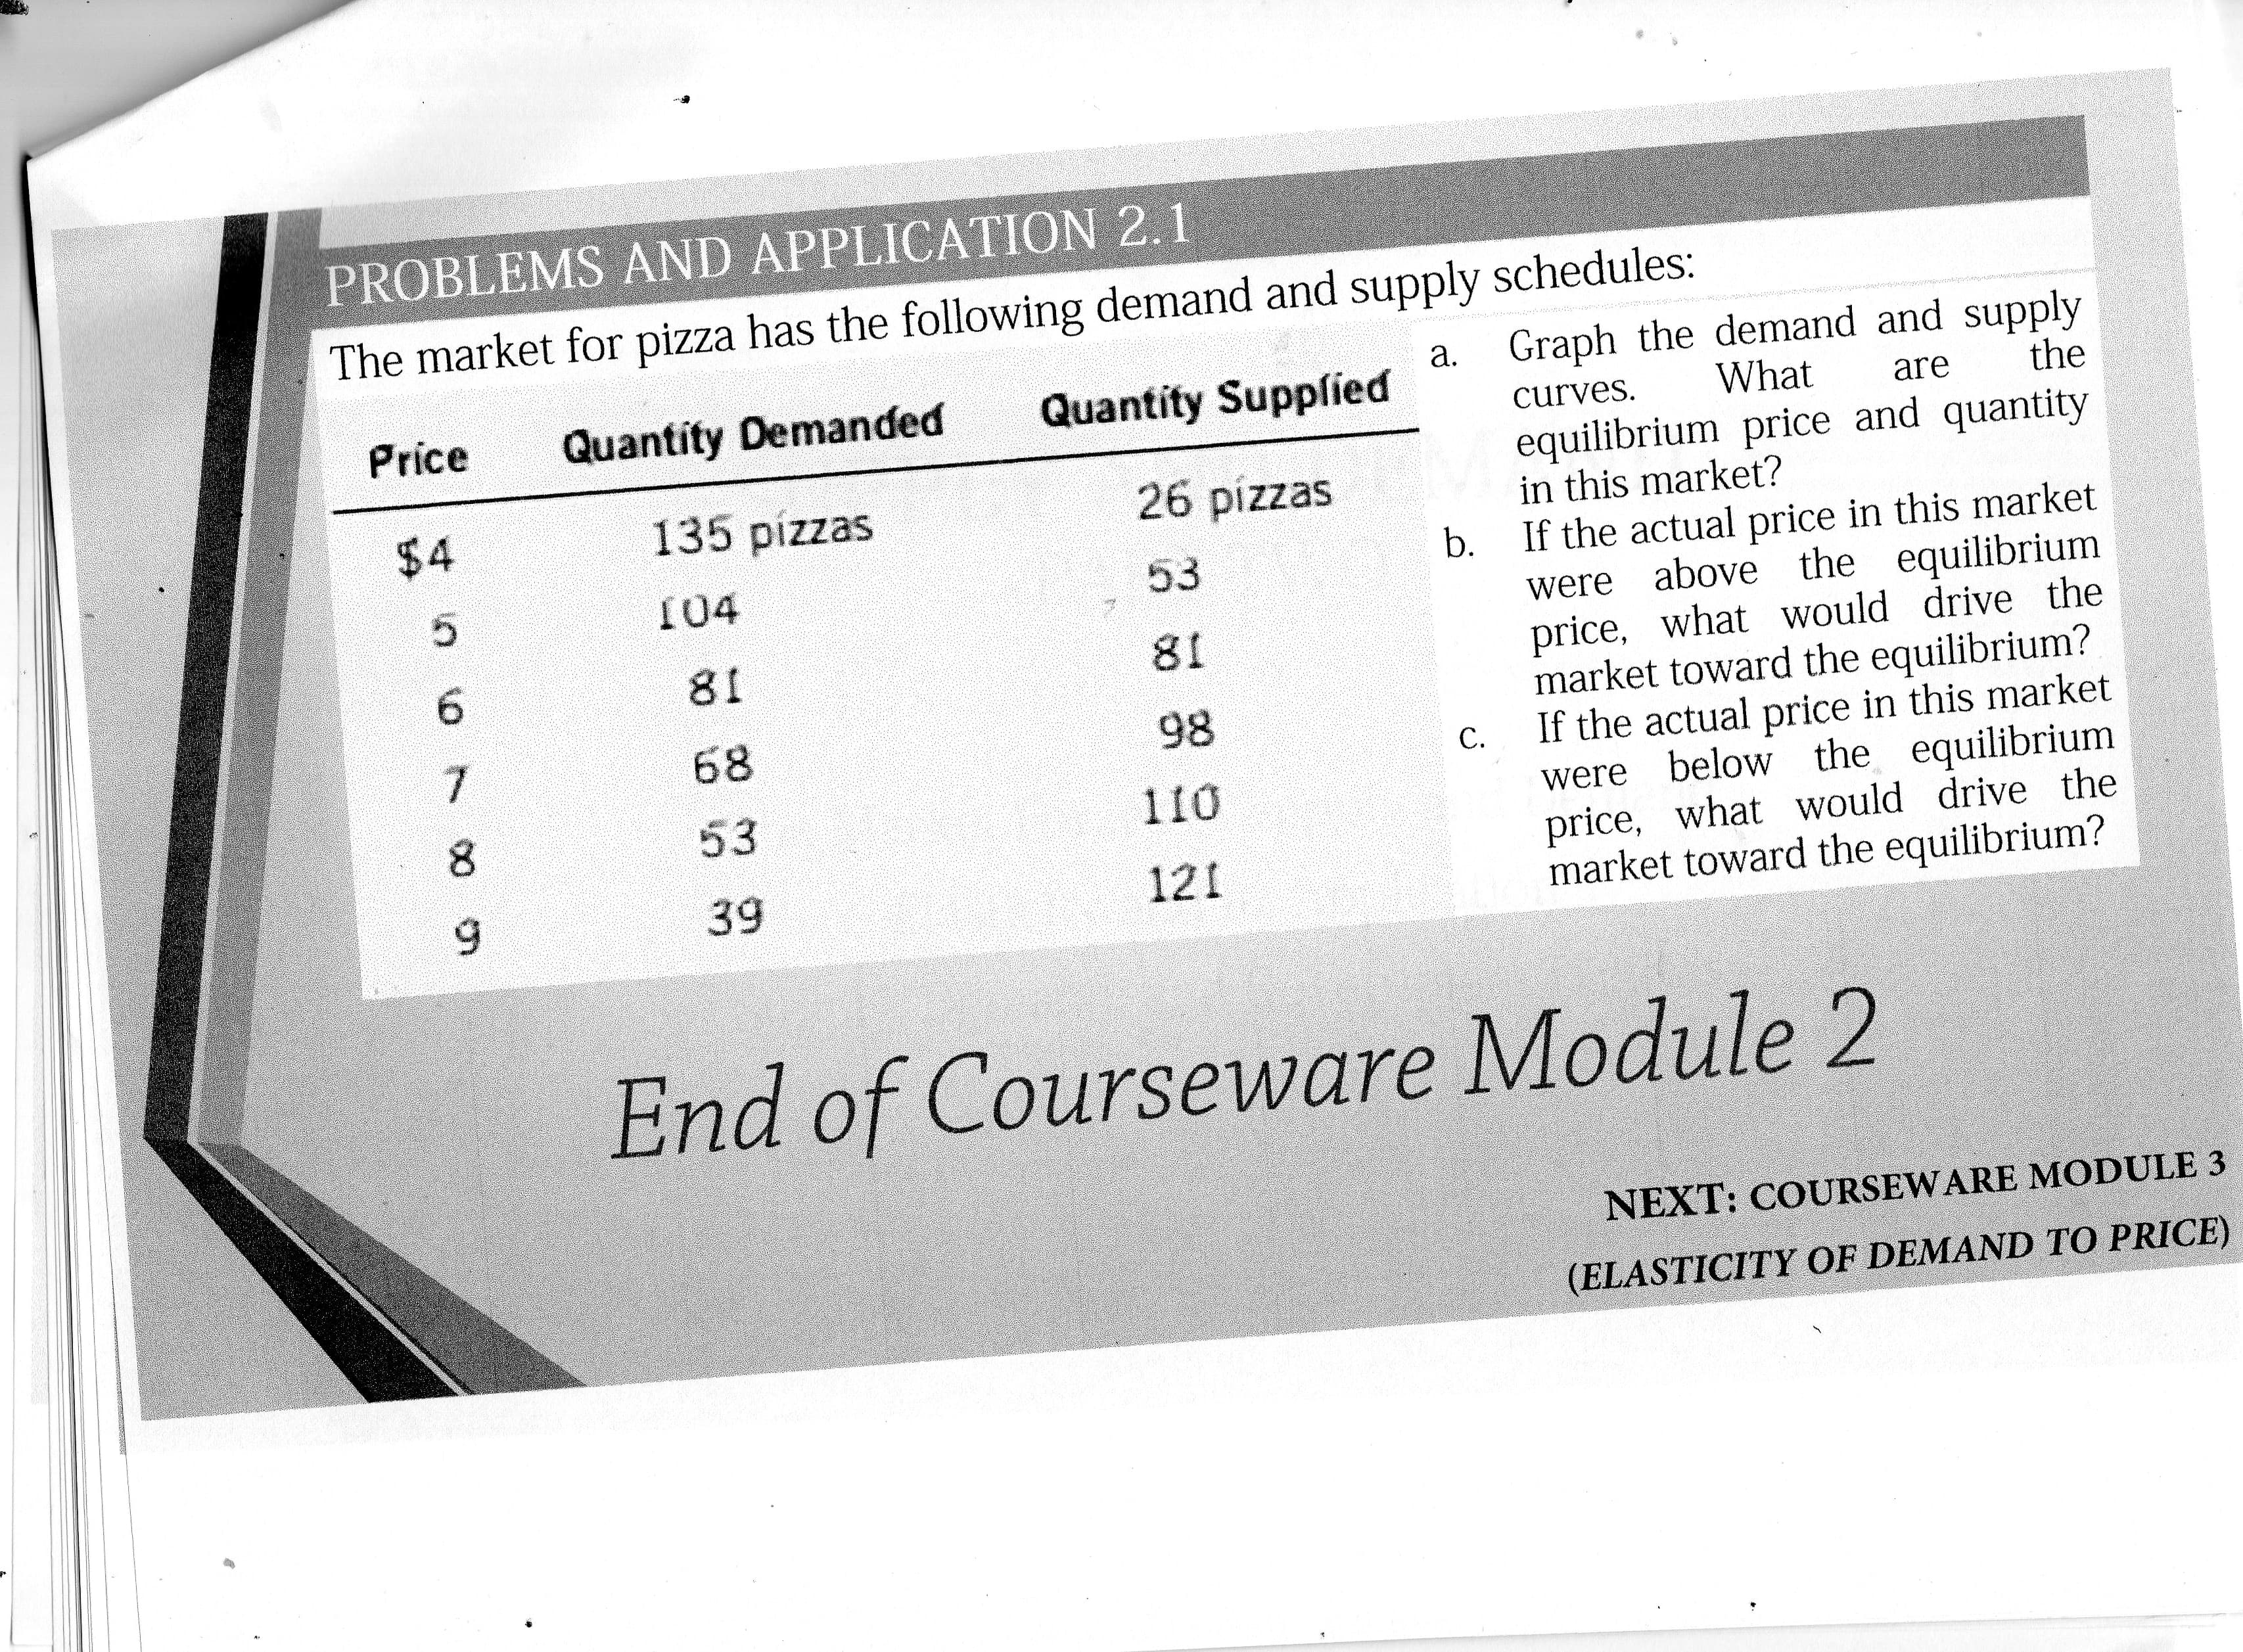 supply schedules:
Graph the demand and supply
What
a.
ed
the
curves.
are
equilibrium price and quantity
in this market?
b. If the actual price in this market
were above the equilibrium
price, what would drive the
market toward the equilibrium?
If the actual price in this market
were below the equilibrium
price, what would drive the
market toward the equilibrium?
С.
